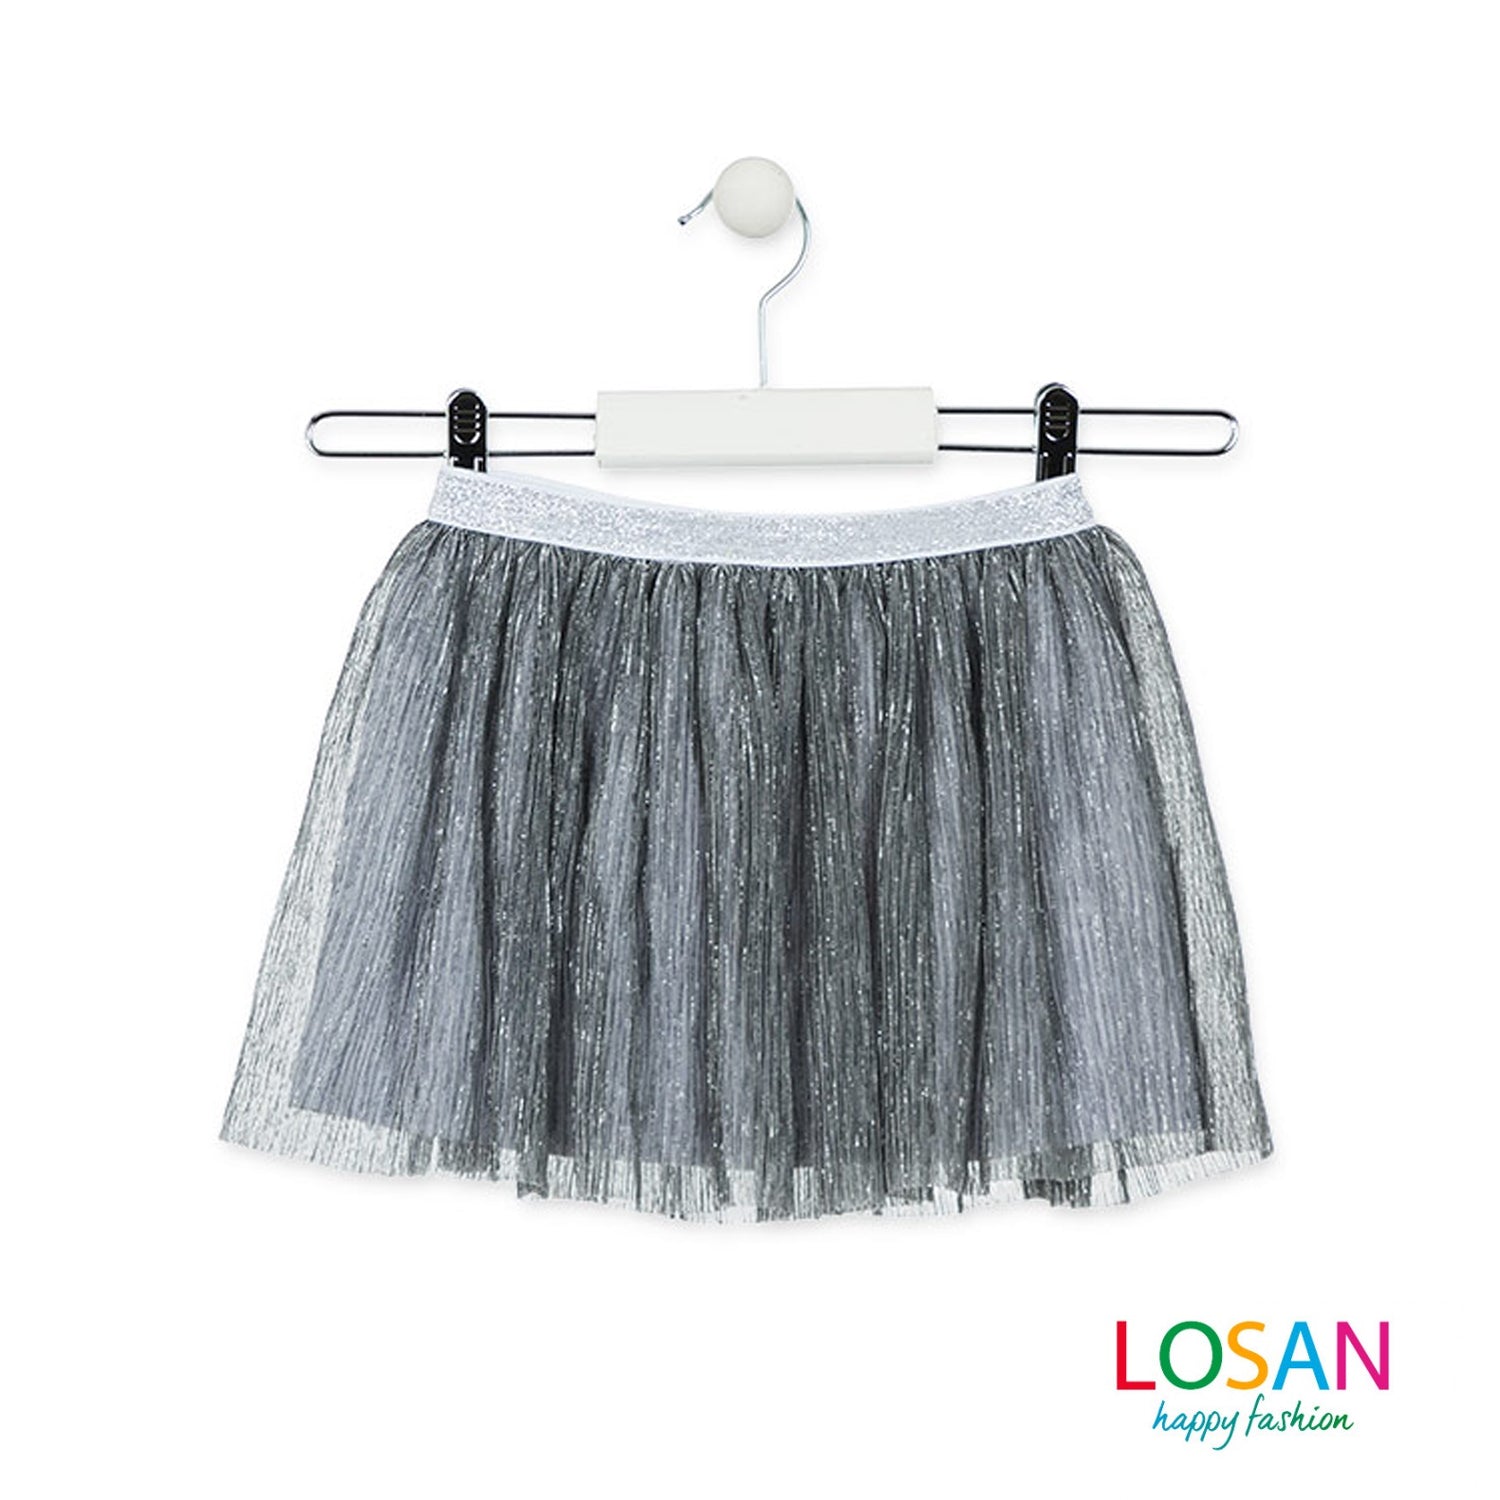 Losan - Gonna Argento in Tulle Bambina Junior